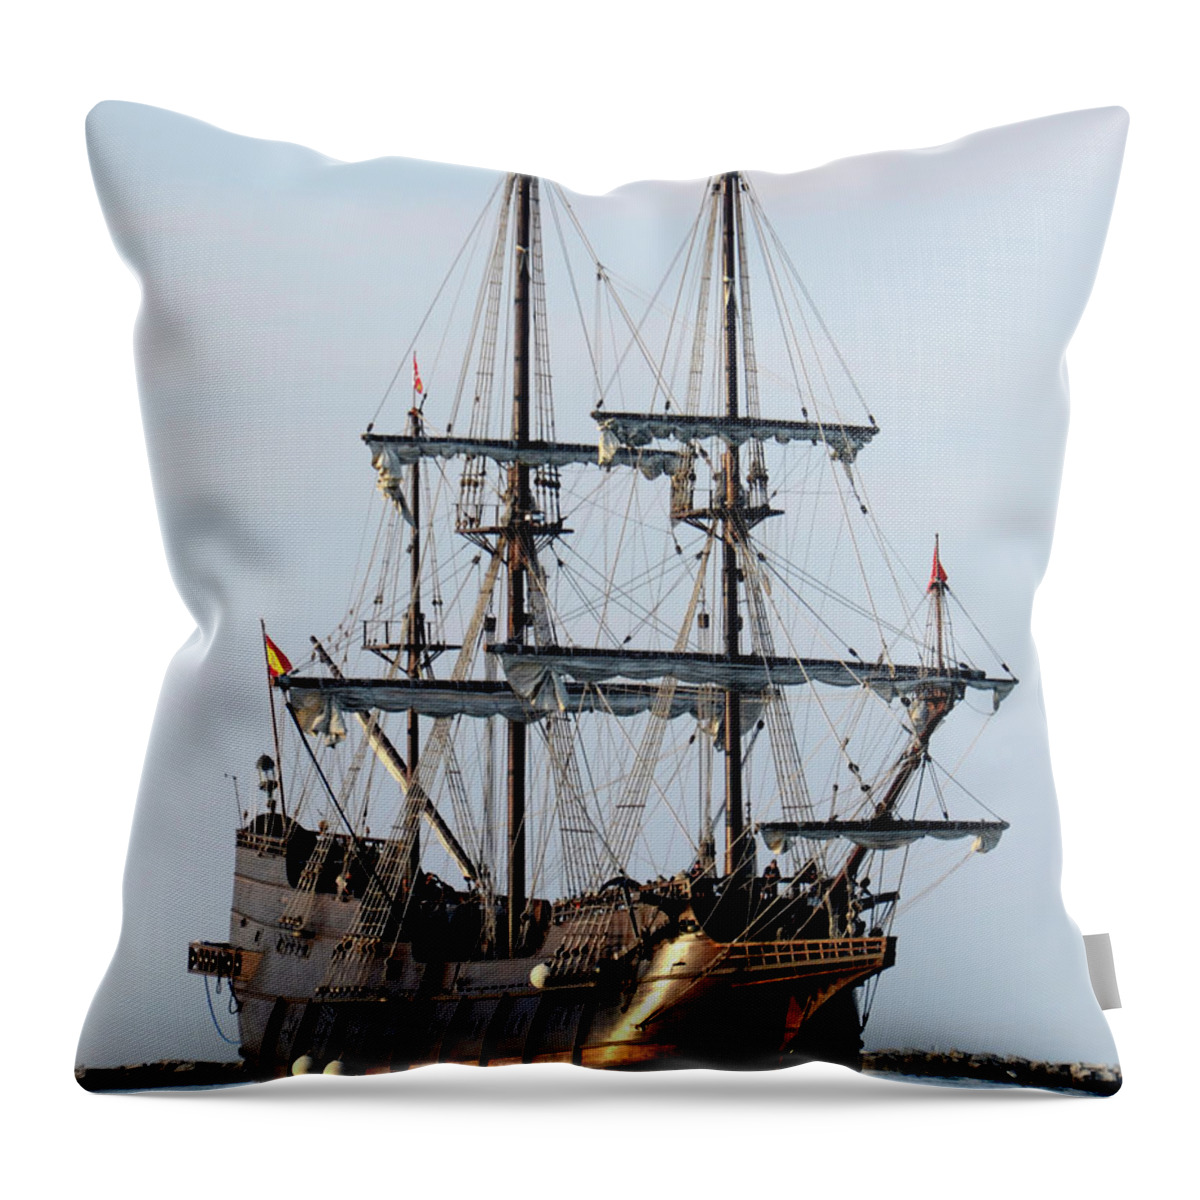 Tall Ship Challenge Throw Pillow featuring the photograph Tall Ship El Galeon Andalucia by Ann Bridges